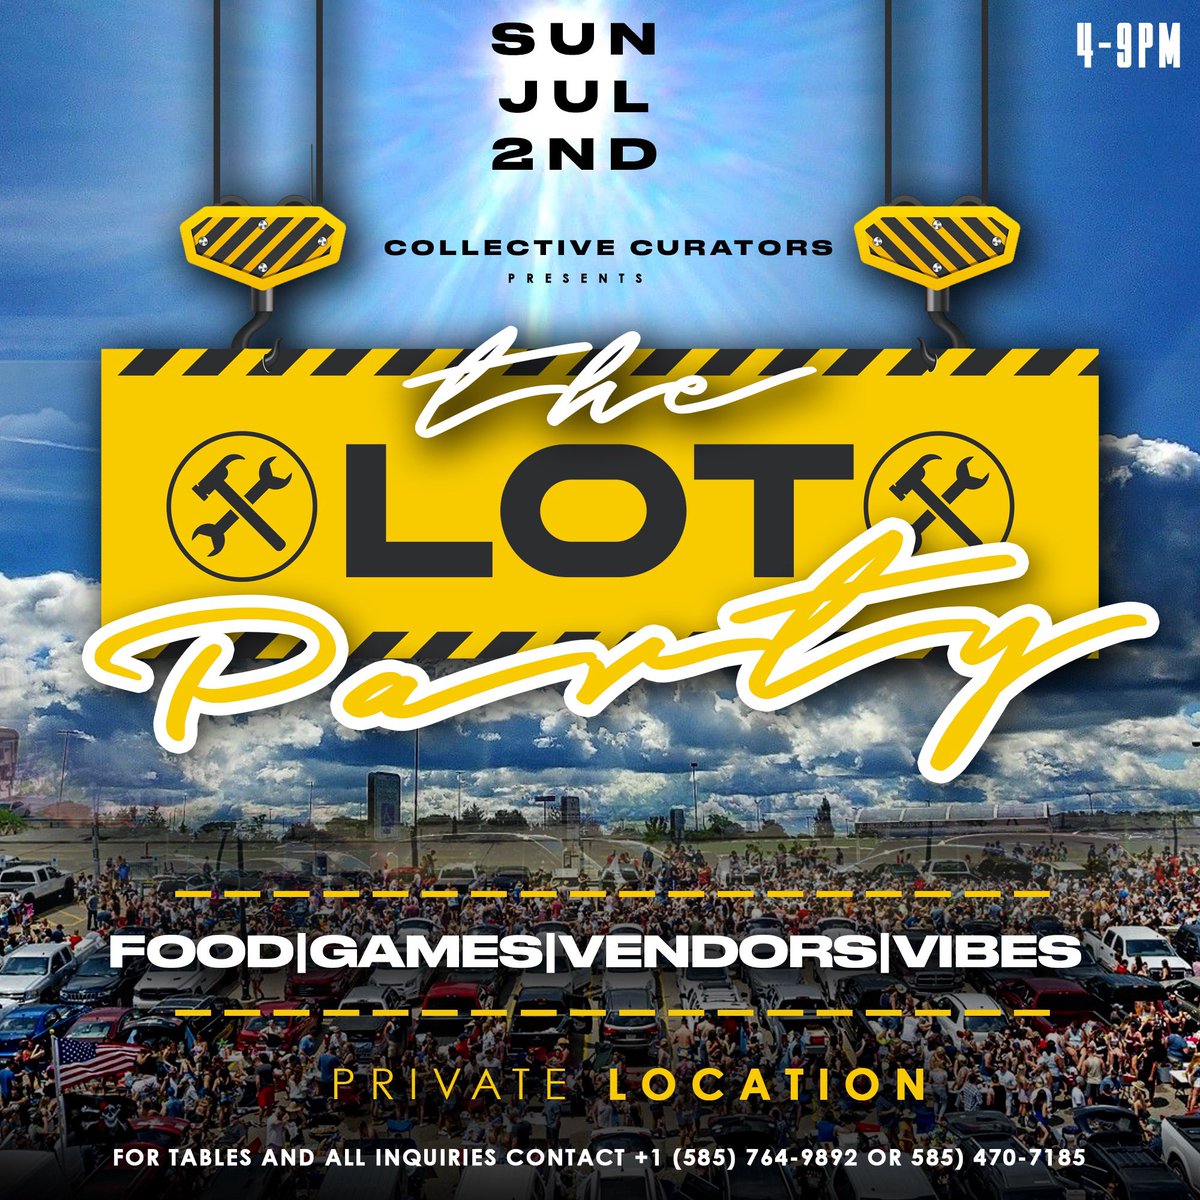 THE LOT PARTY 

JULY 2nd 

4-9

FOOD|GAMES|HOOKAH|VIBES|GOODDRINKS

WE GOING UP JULY 4th WEEKEND 🎬

For Table and Vendor info 764-9892  470-7185

lotparty2k23.eventbrite.com